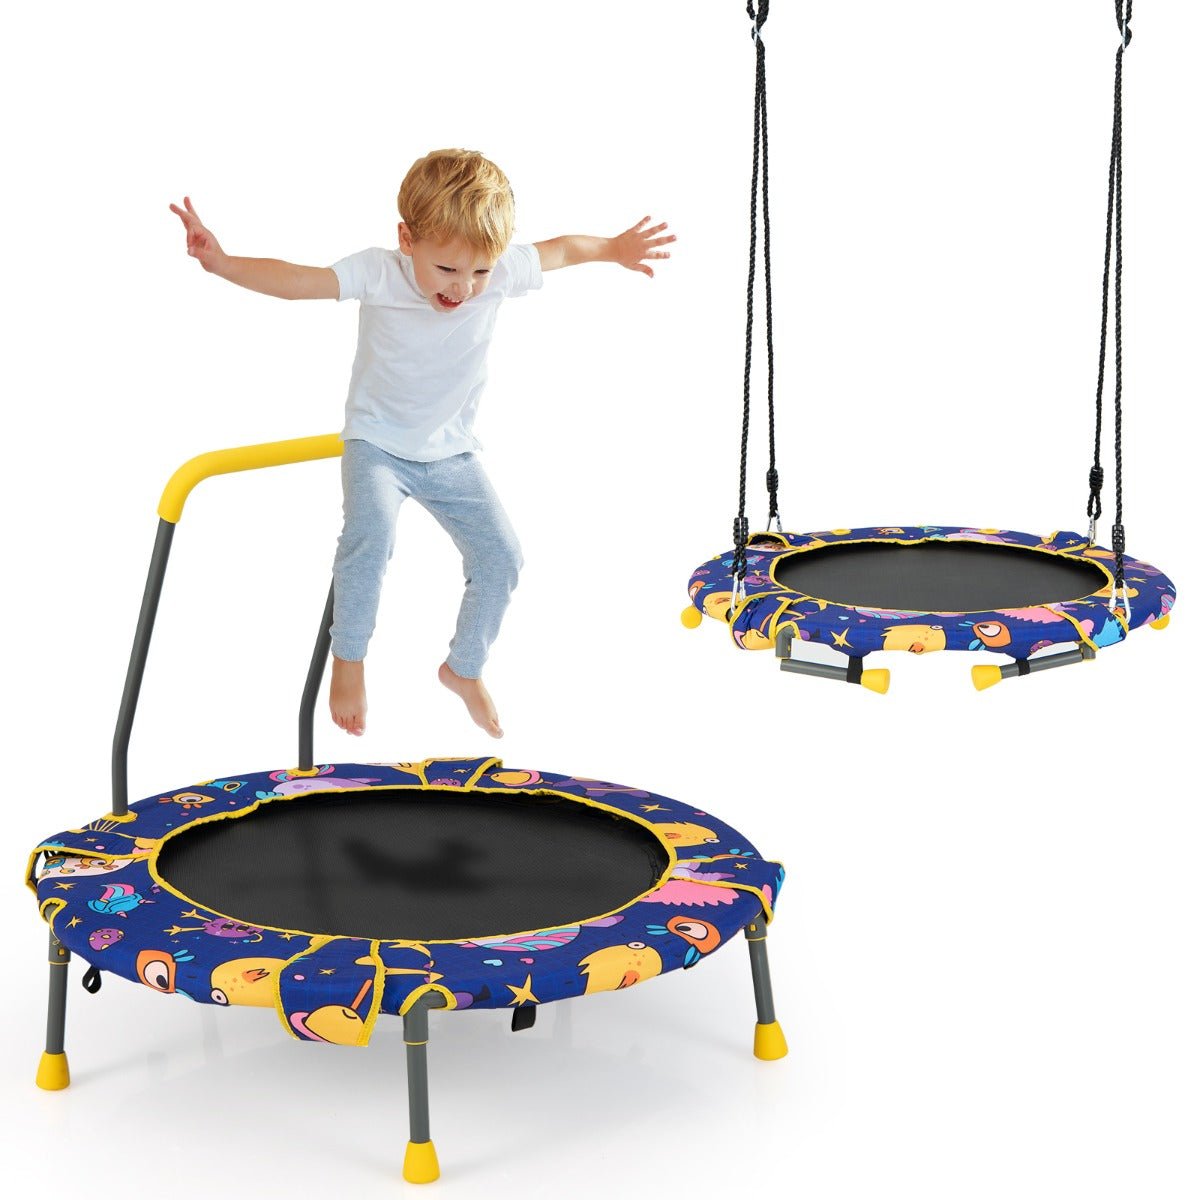 Dynamic Fun: Convertible Swing and Trampoline Set with Upholstered Handrail for Kids